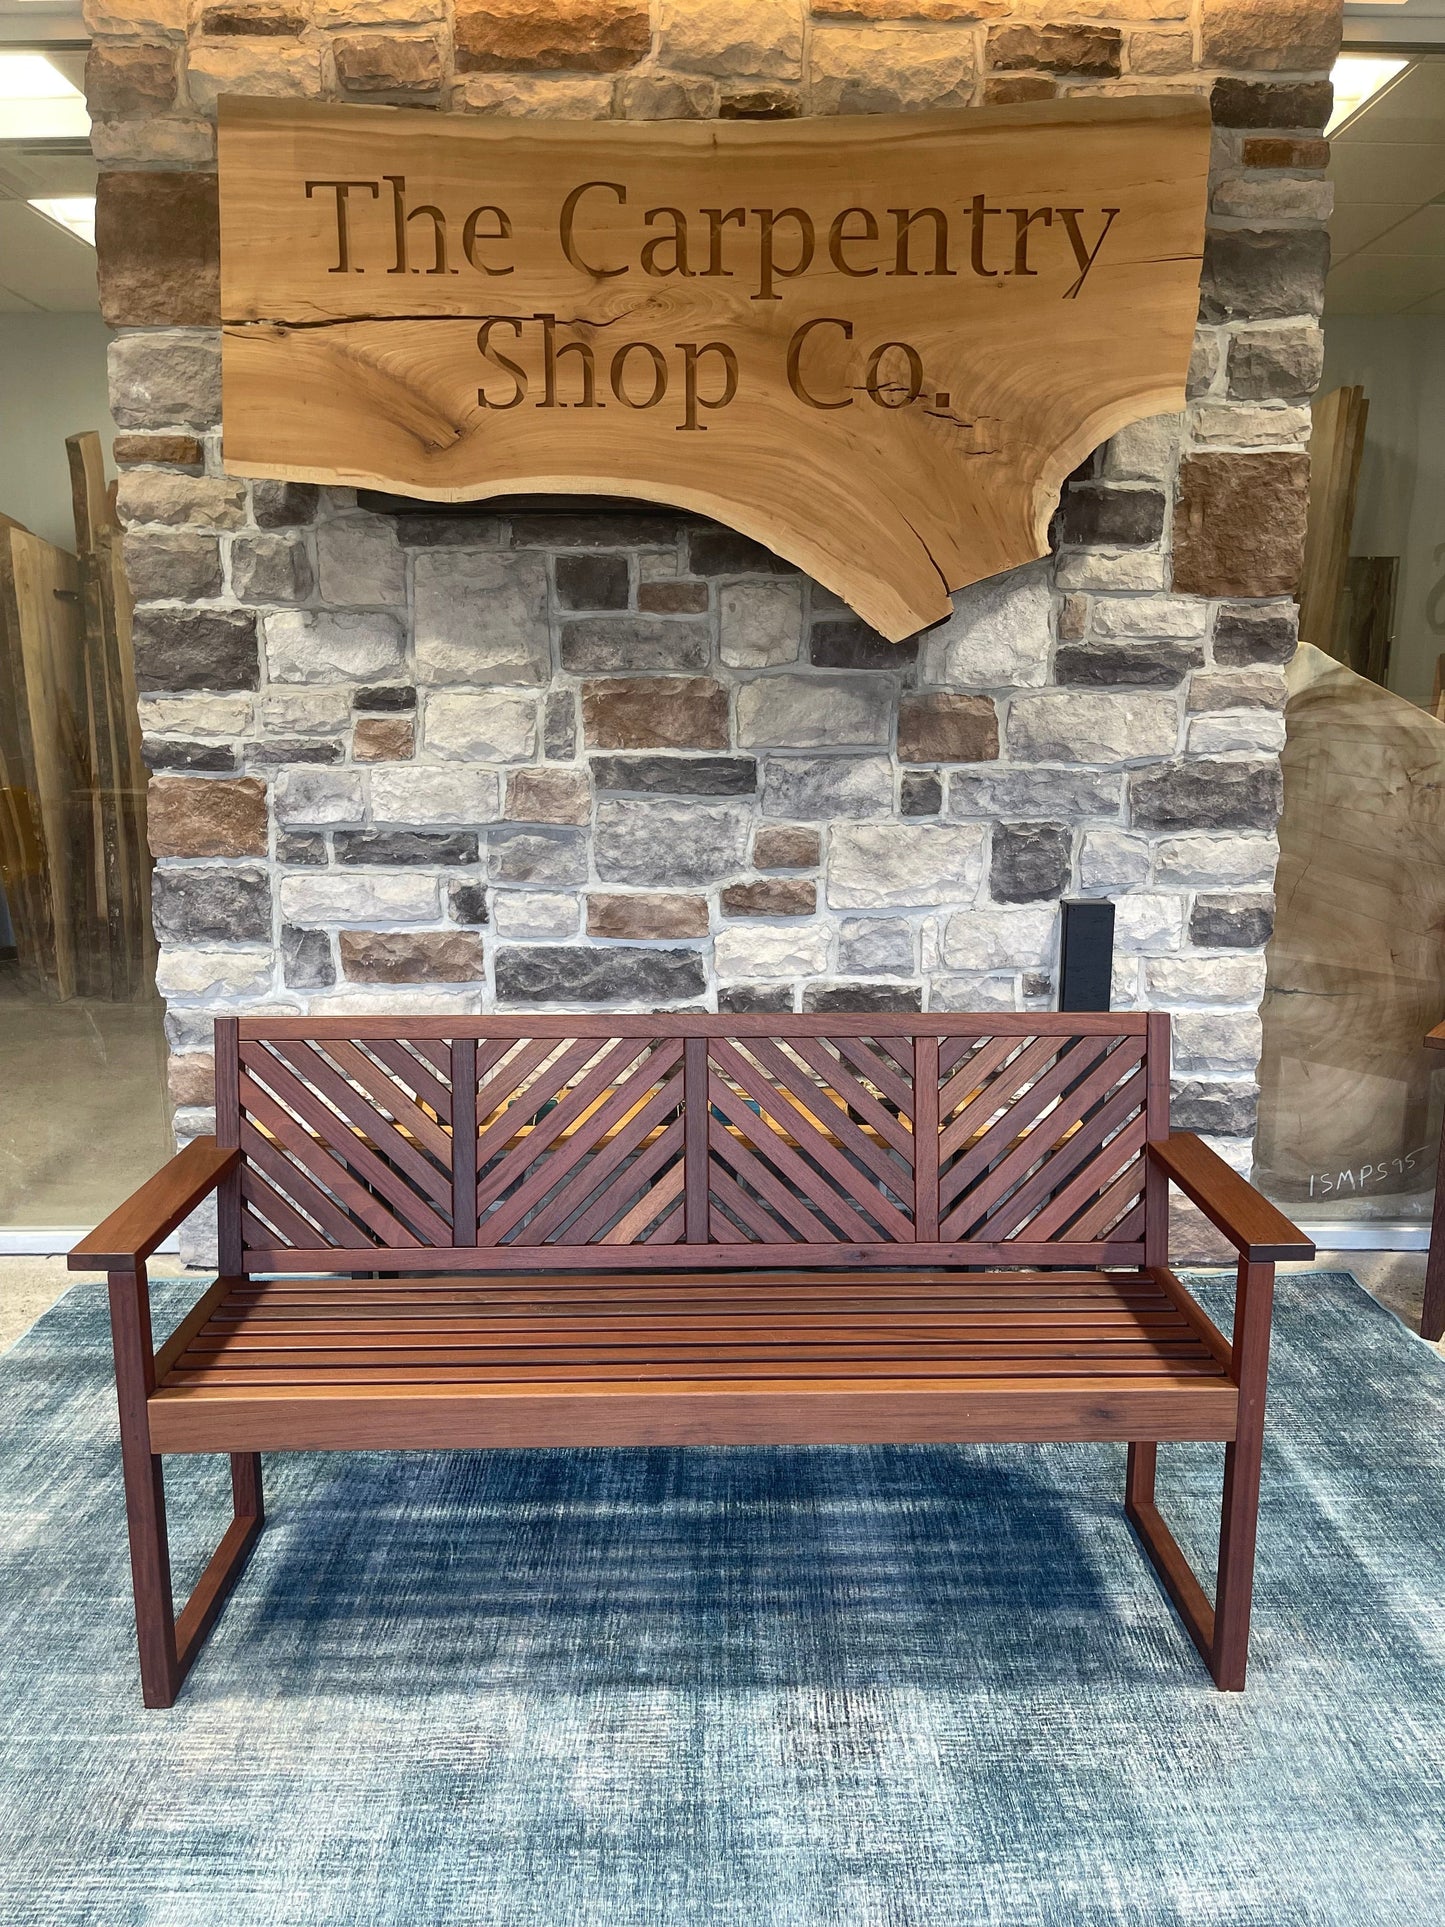 The Carpentry Shop Co. Ipe Bench